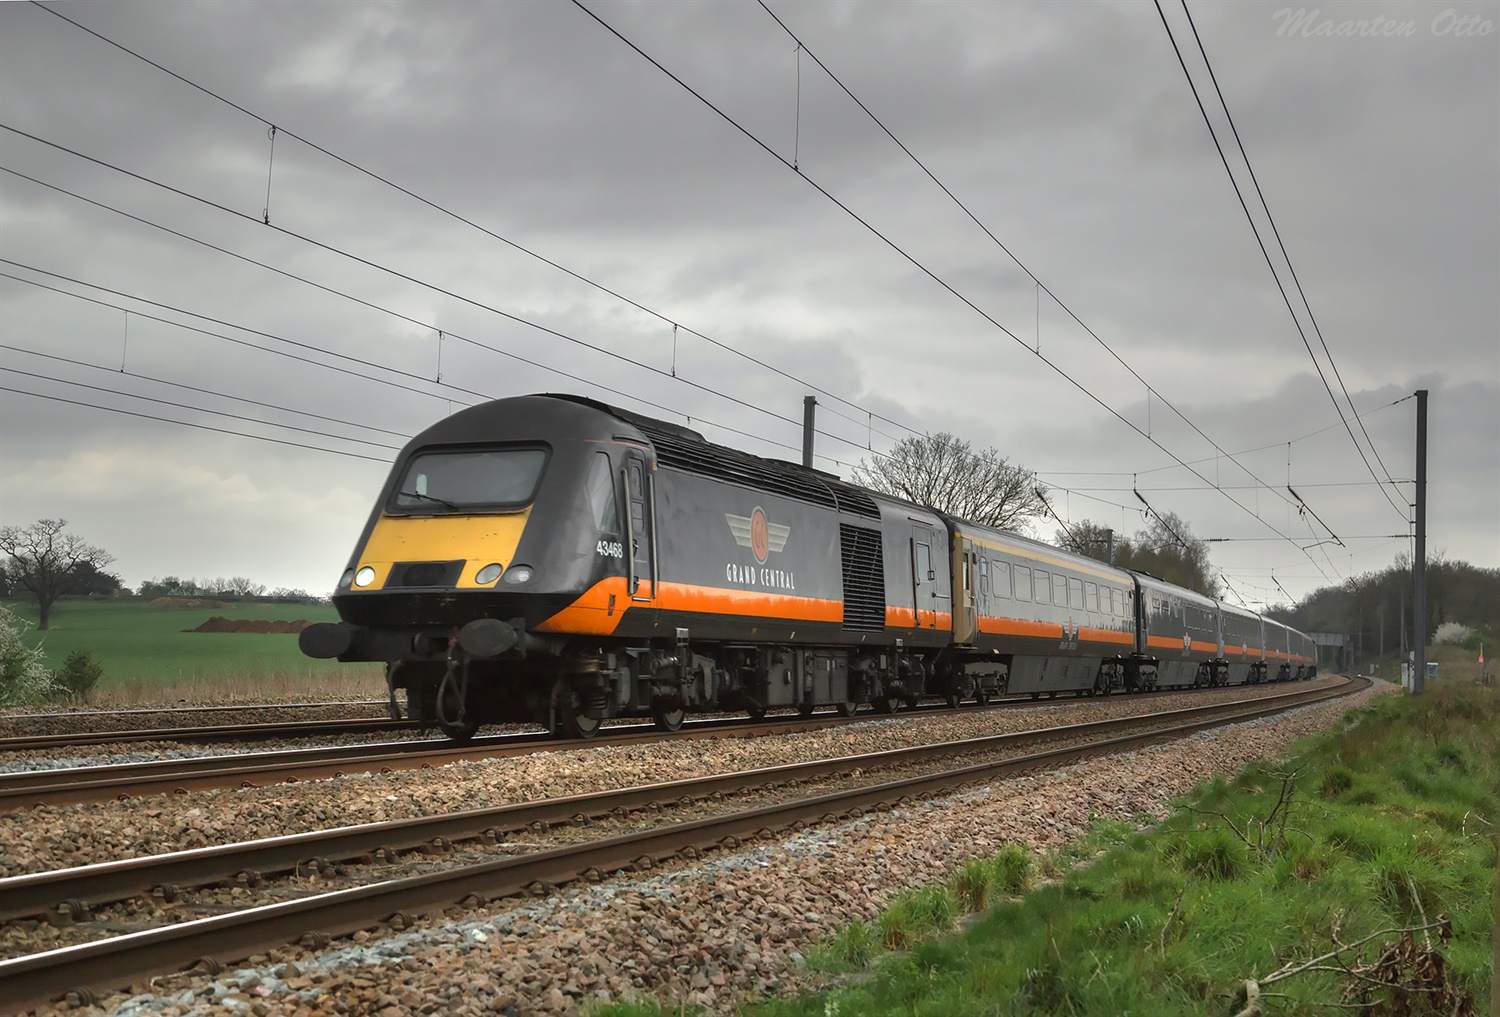 Additional ECML services will have ‘significant impact’ on Grand Central